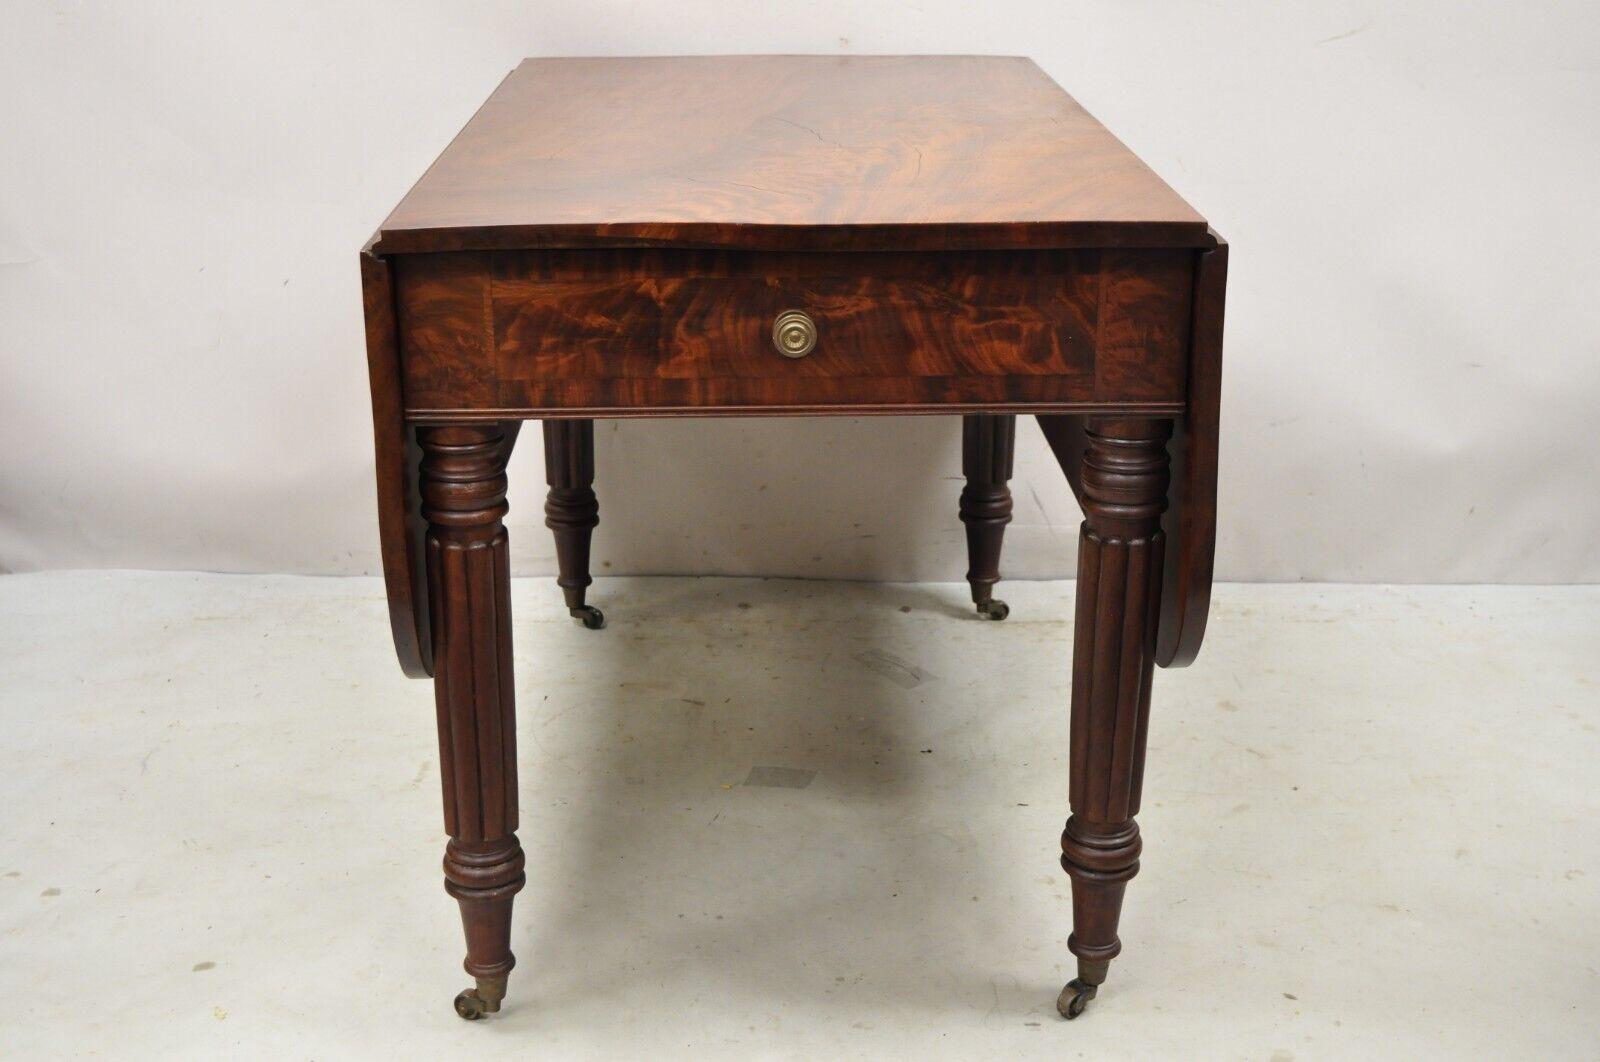 Antique 19th century Crotch Mahogany federal drop leaf breakfast dining table w/ drawer. Item Drop leaf sides, twin carved legs, (1) faux drawer, (1) dovetailed drawer, rolling casters, beautiful wood grain, very nice antique item, quality American